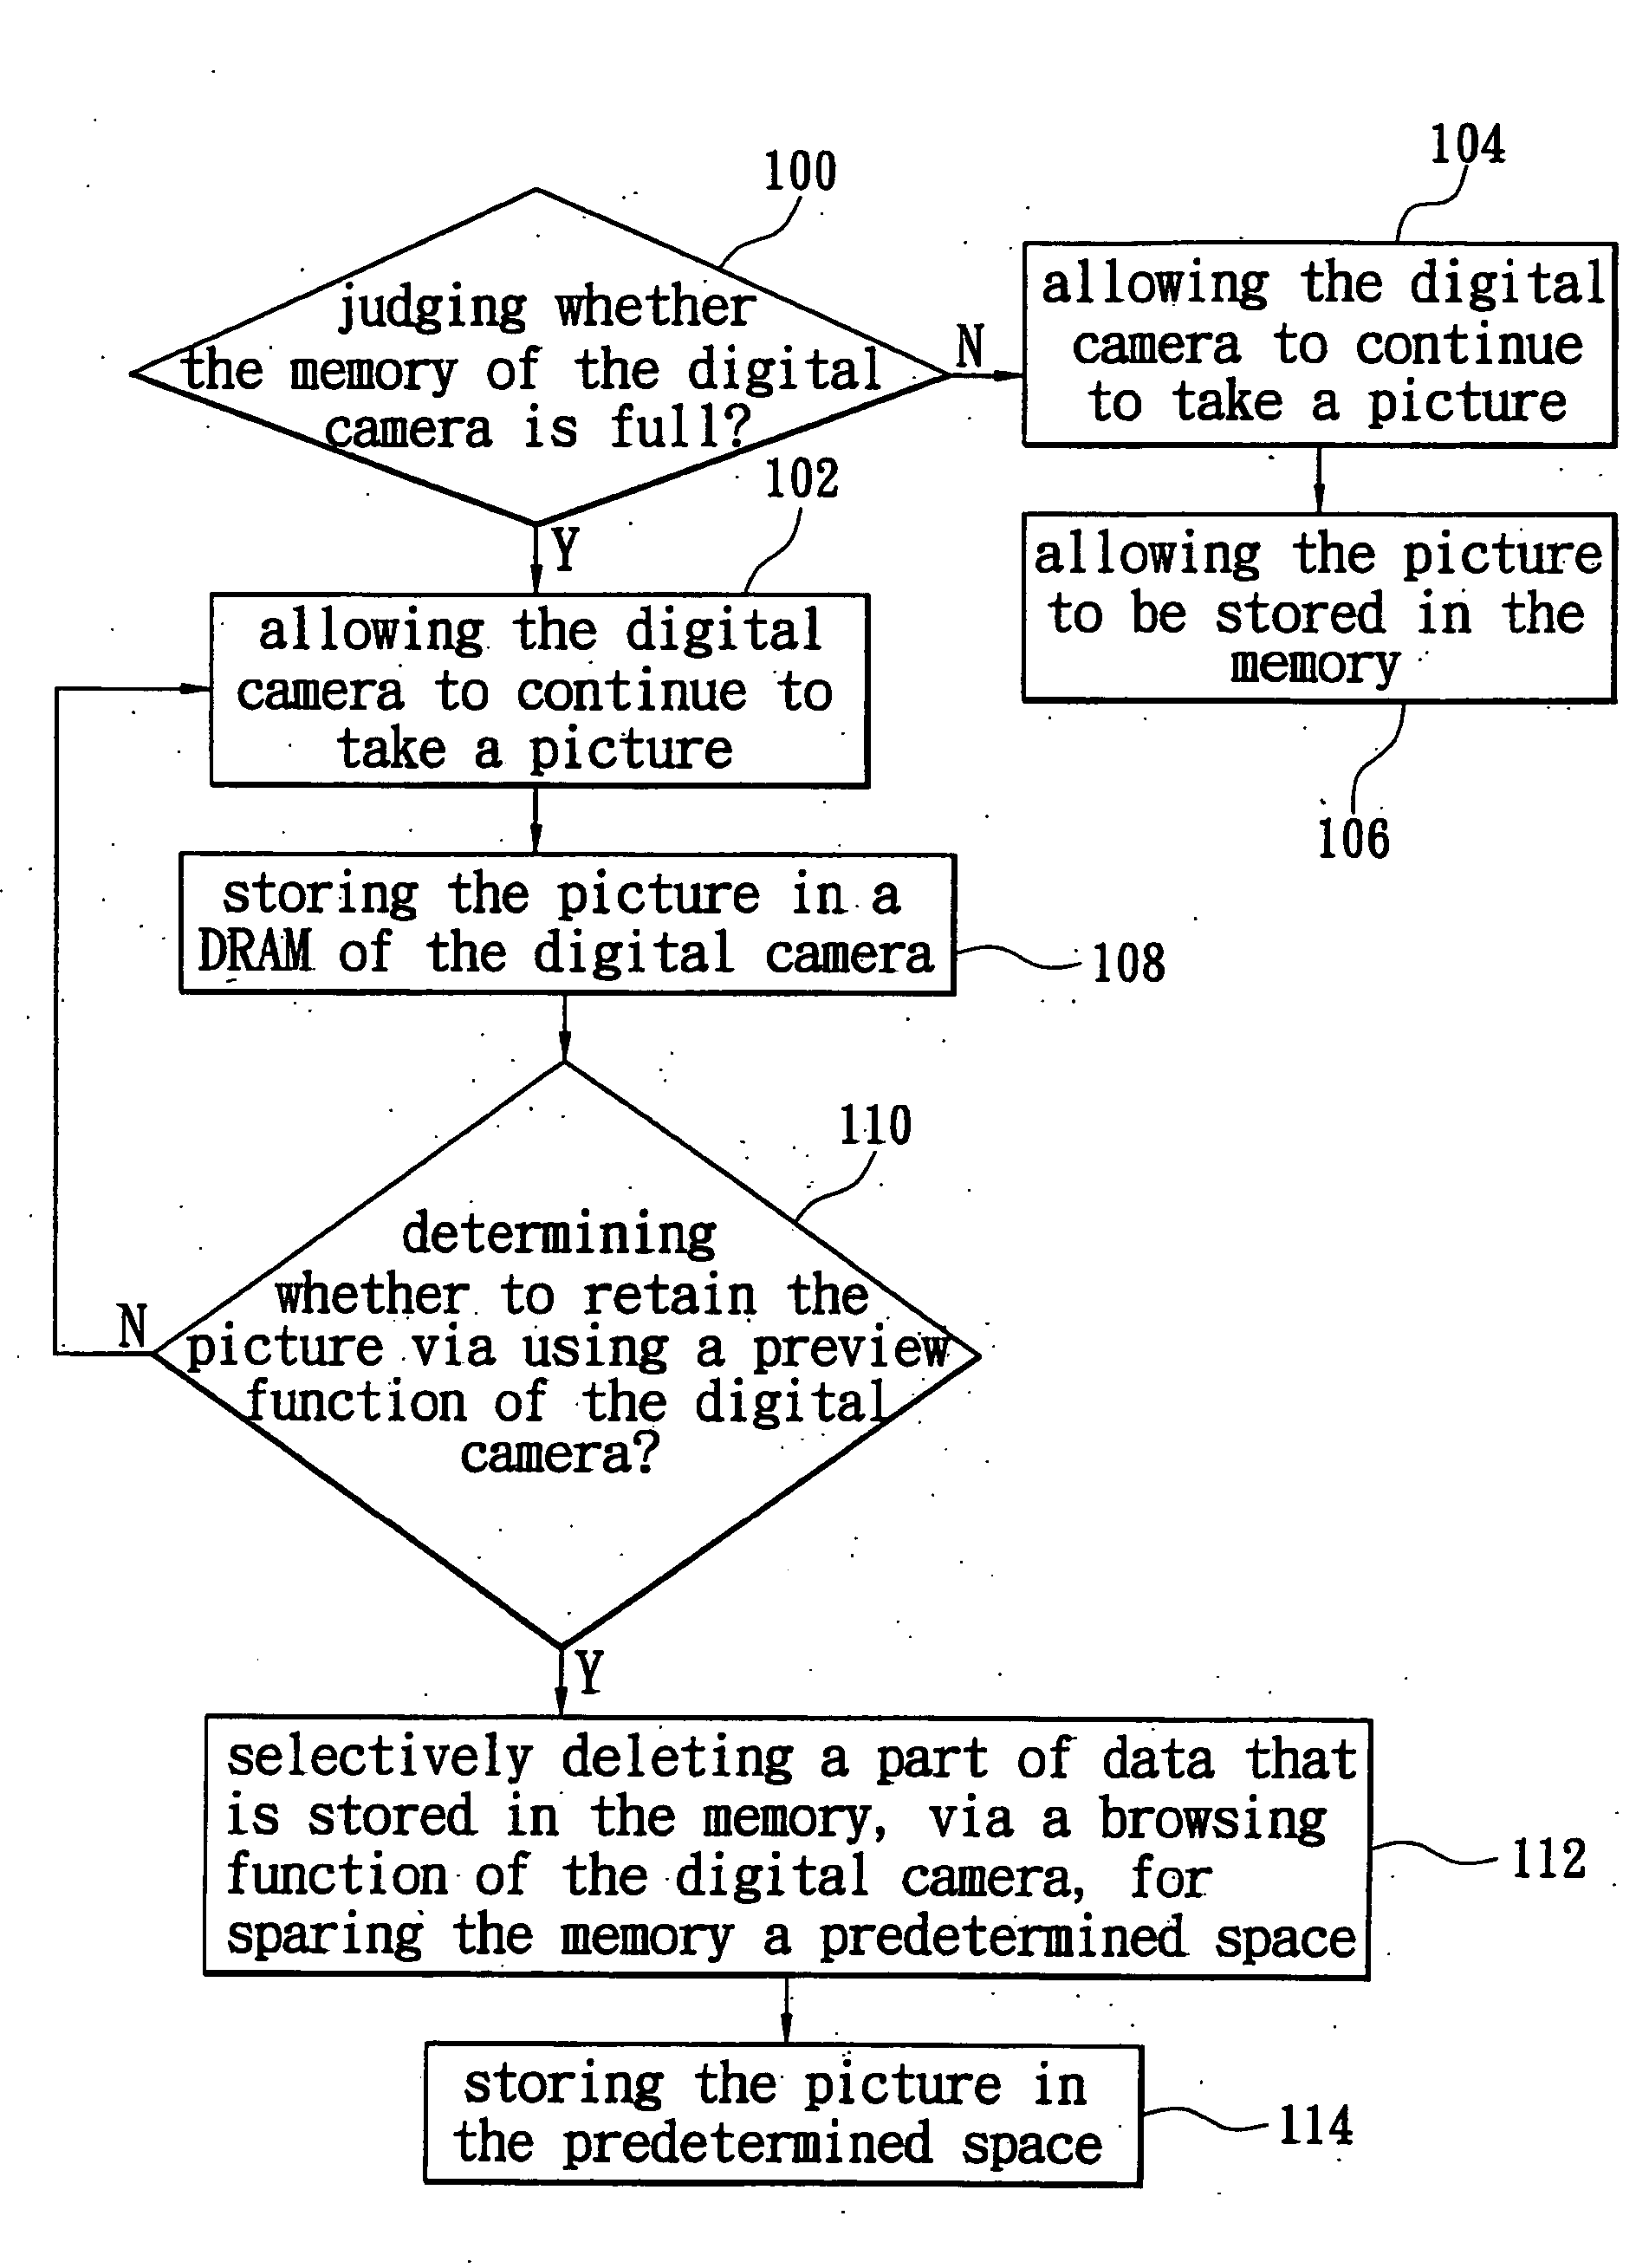 Method of taking a picture when a memory of a digital camera is already full